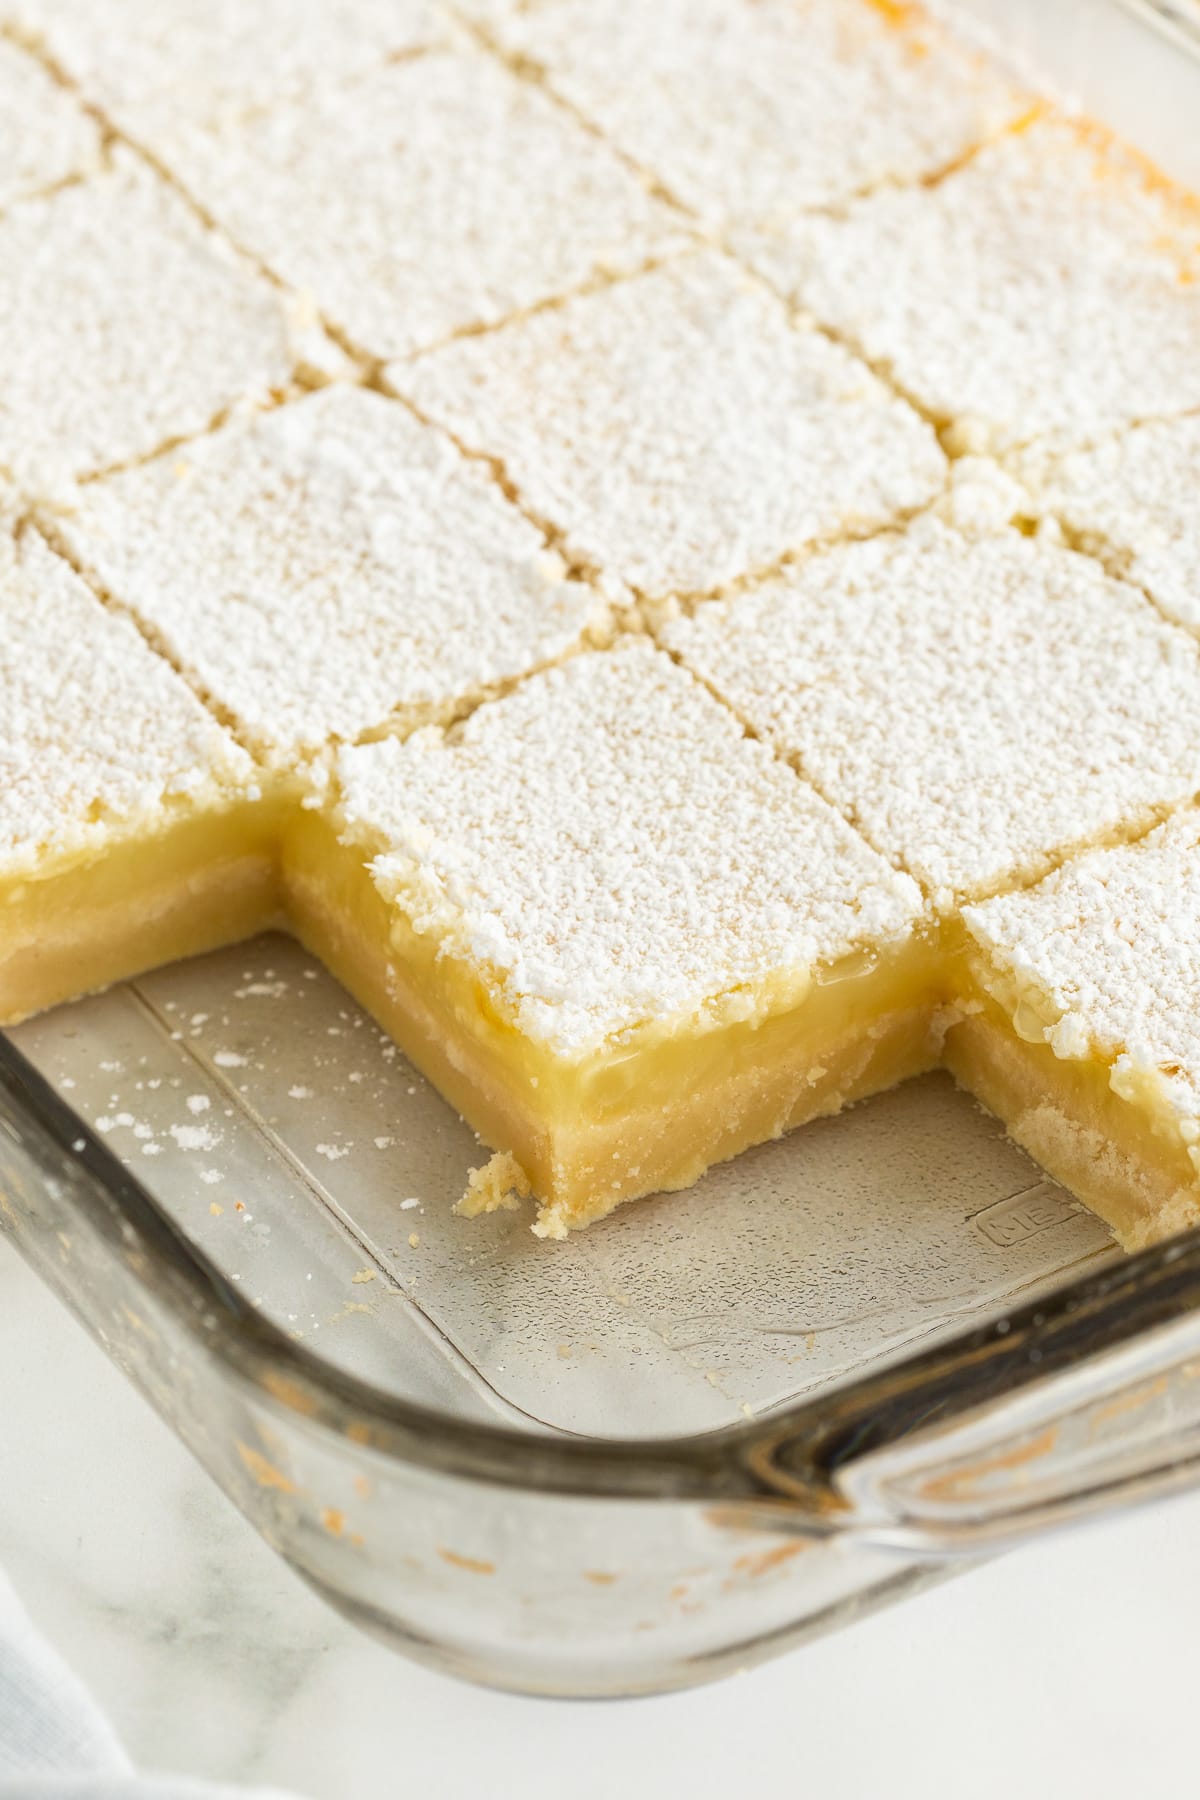 Sliced lemon bars in a baking dish with a few missing.